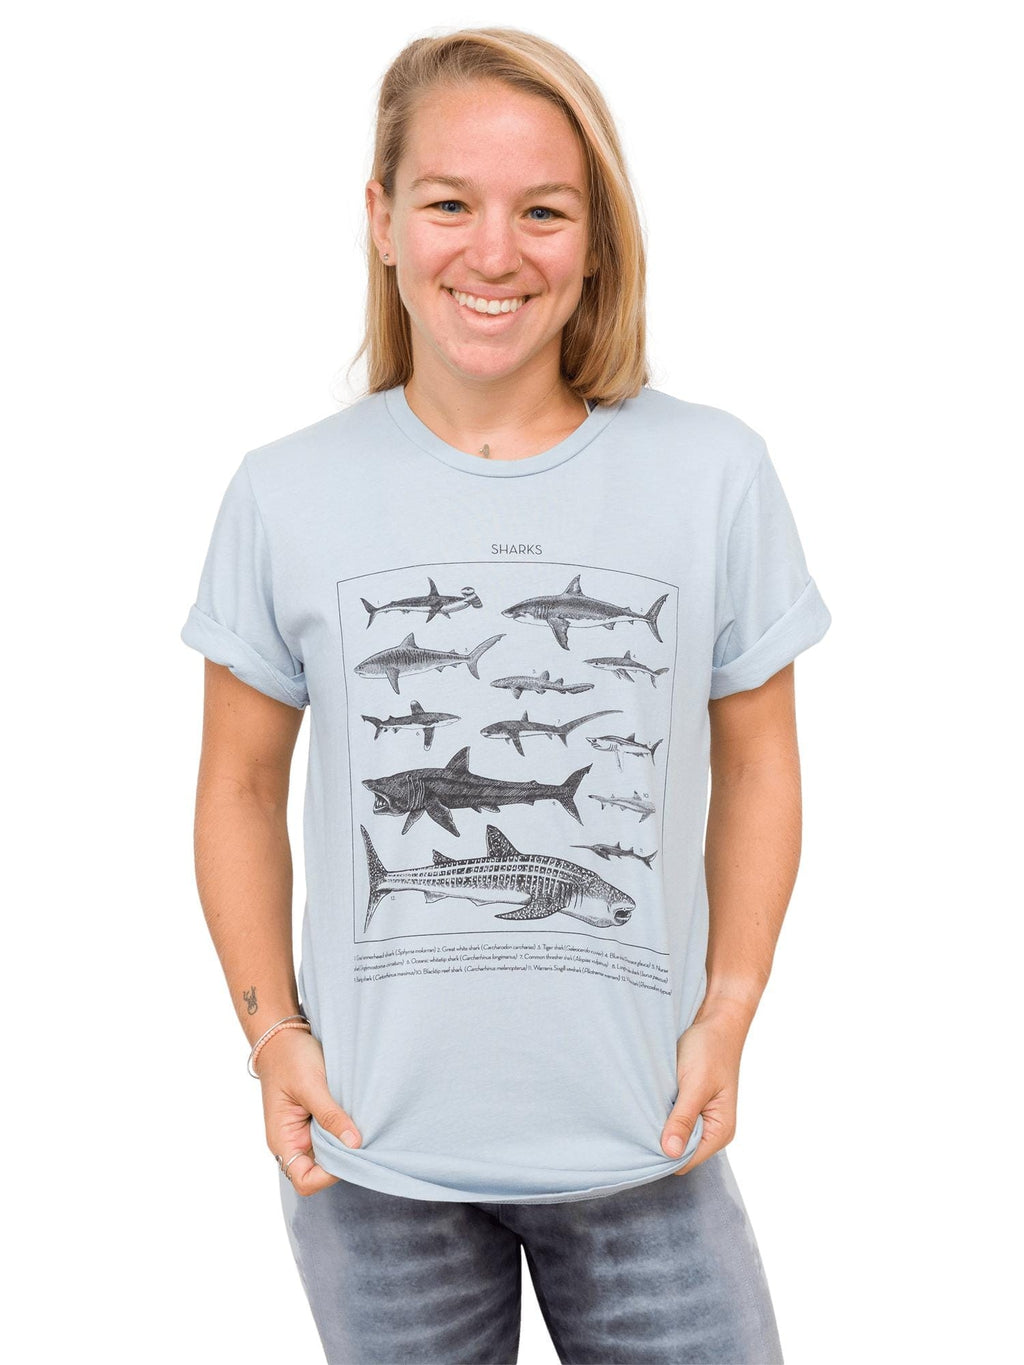 Model: Erin is a coral ecologist and Program Manager here at Waterlust. She 4&#39;11&quot;, 110 lbs, 32A and is wearing an XS tee.